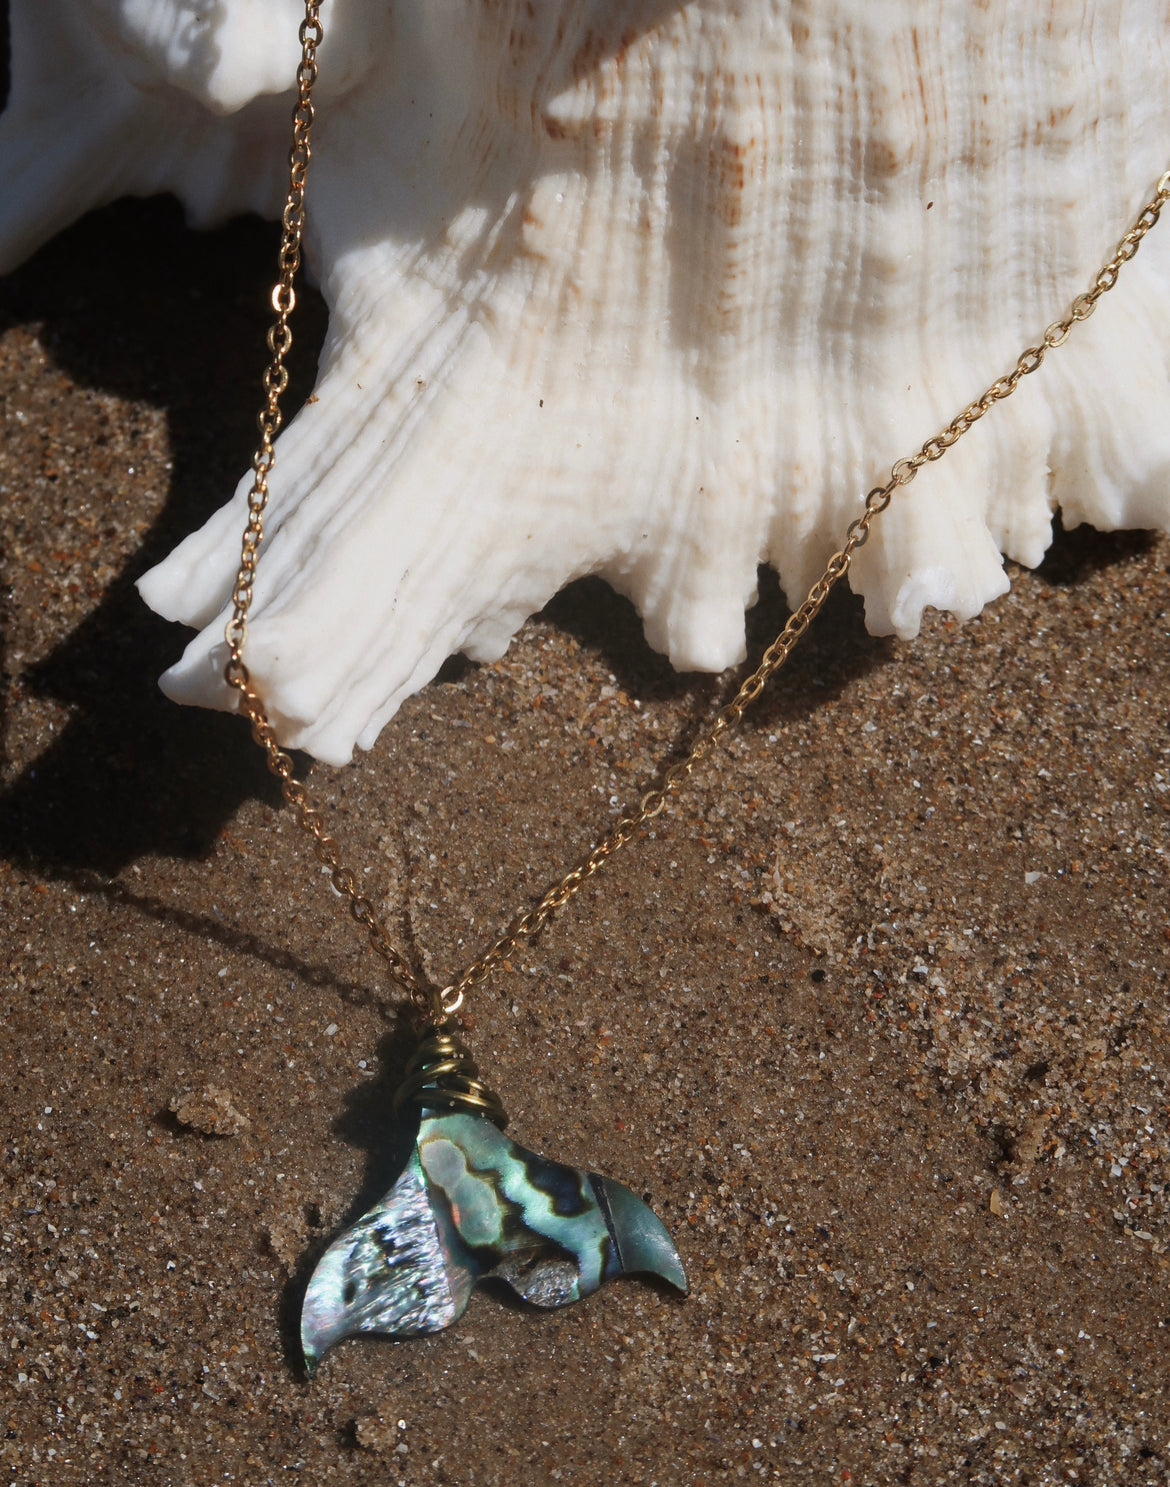 SIREN TAIL NECKLACE – Sirencore Jewelry